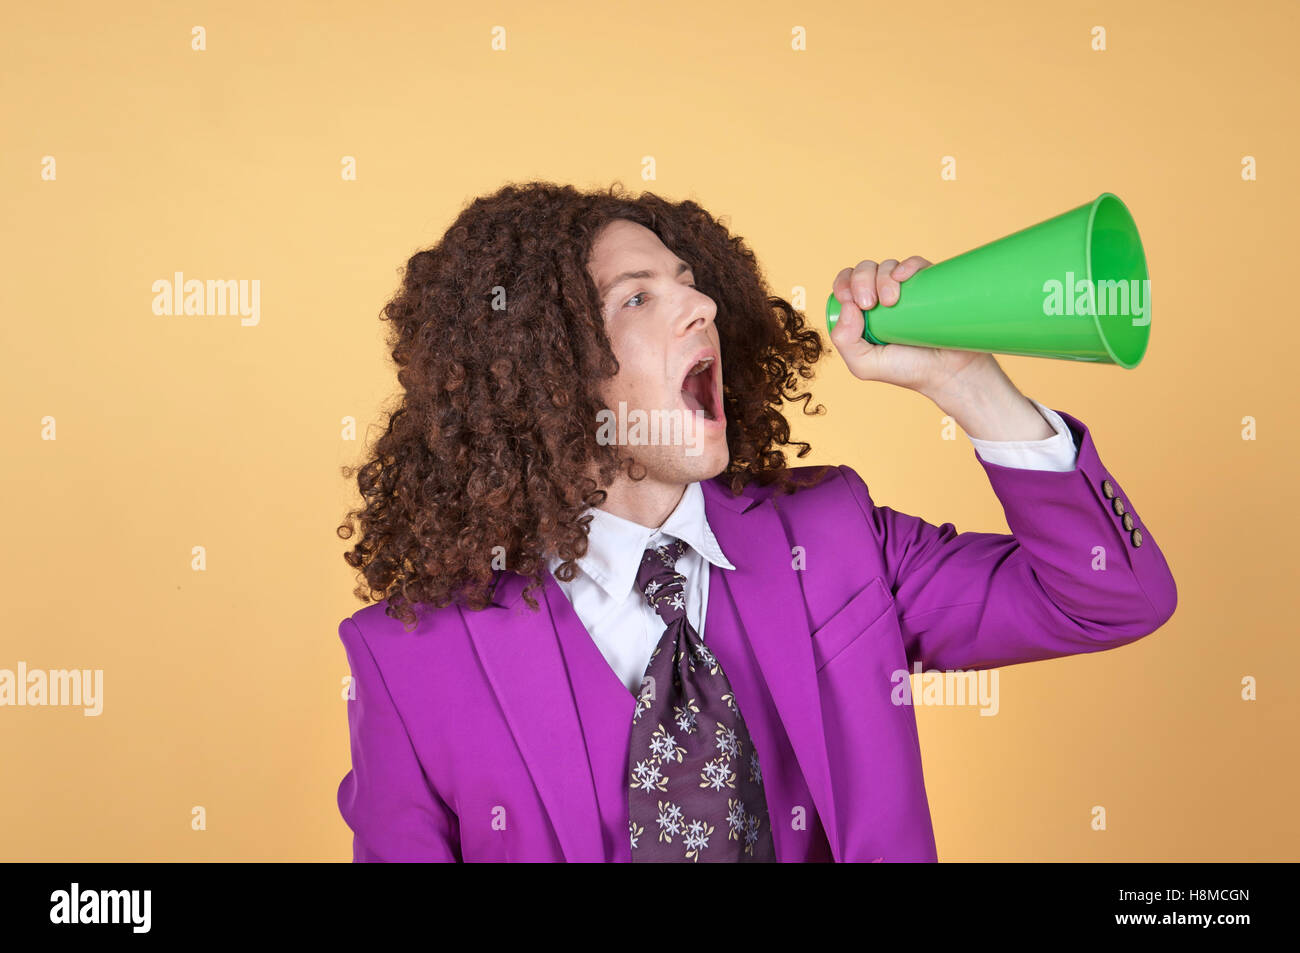 Caucasian man with afro wearing Purple Suit shouting from a cone Stock Photo